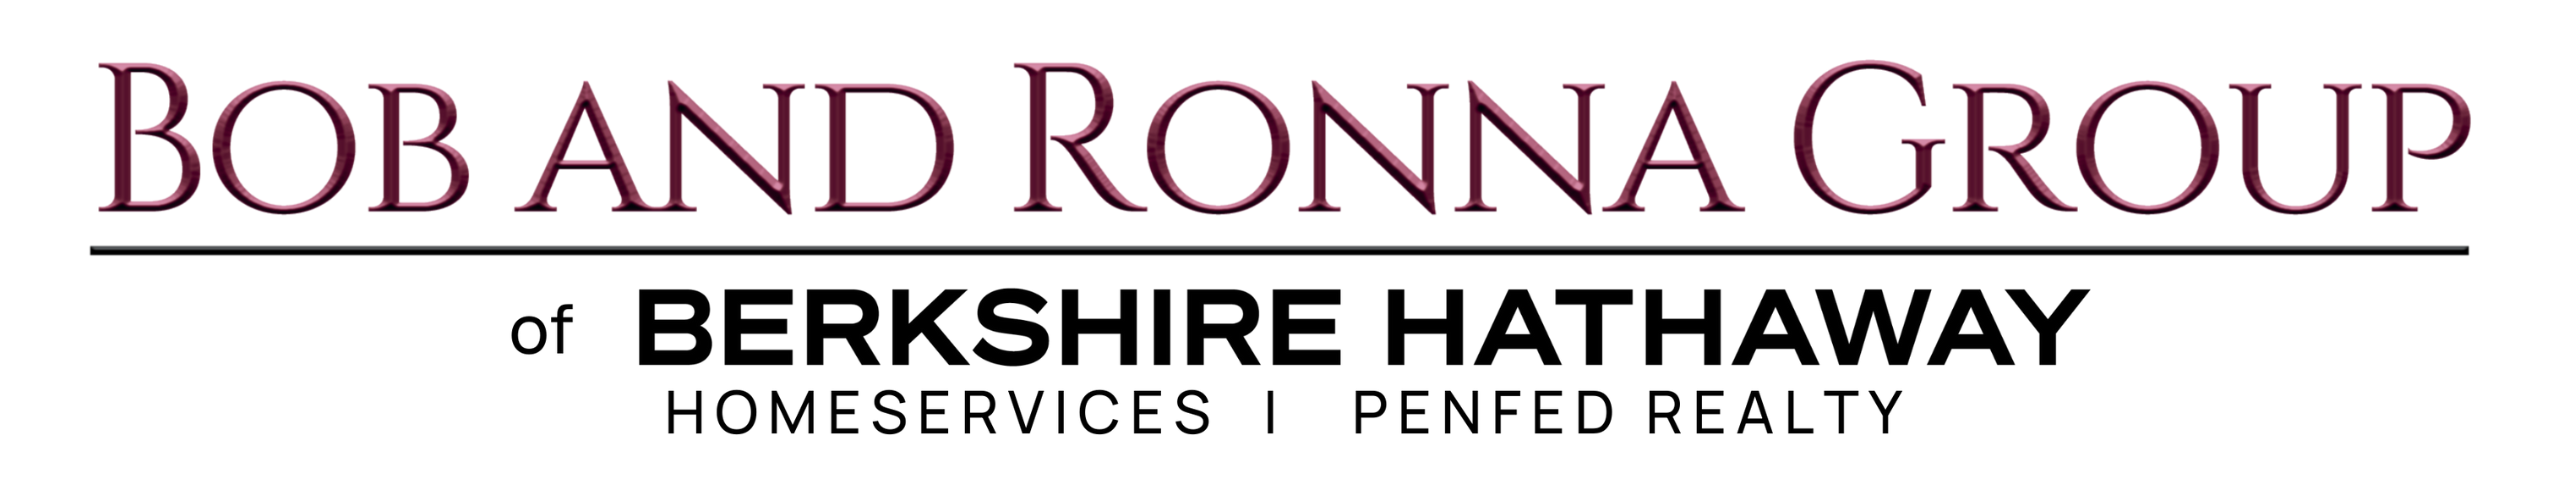 The Bob & Ronna Group of Berkshire Hathaway HomeServices PenFed Realty - Maryland's Premier Real Estate Group - Formal Logo